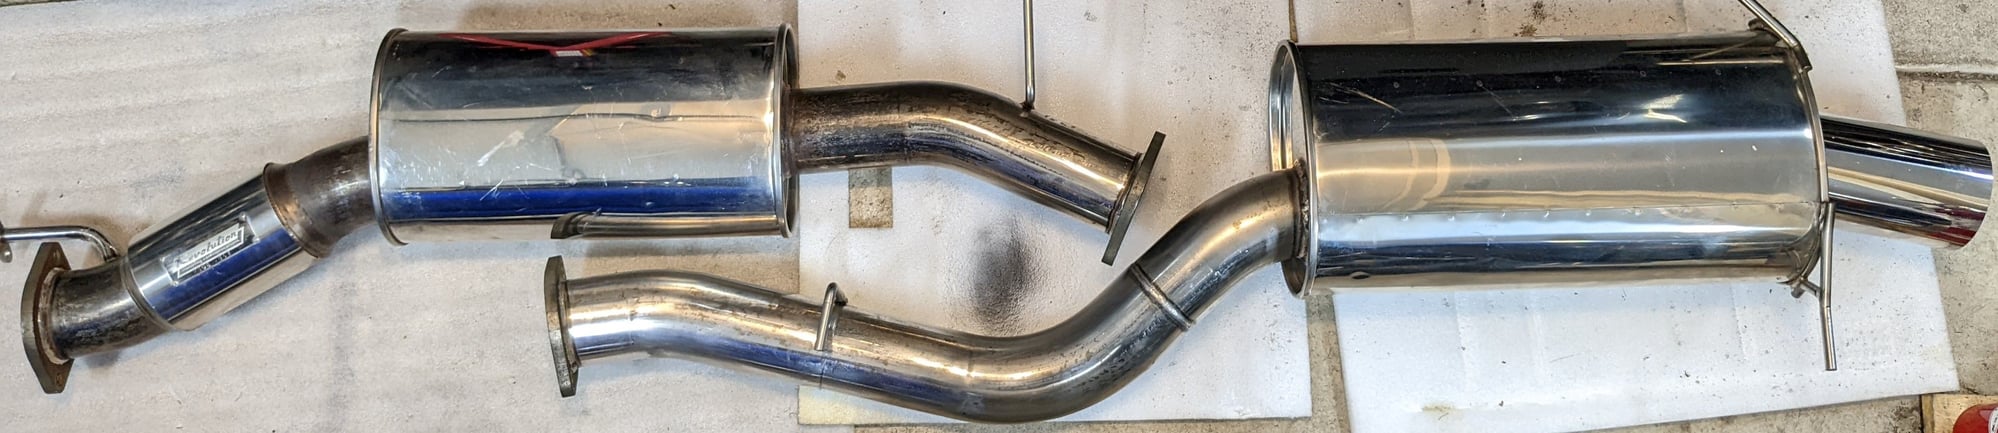 Engine - Exhaust - FD3S Revolution 90mm exhaust system with catted mid pipe - Used - 1993 to 2002 Mazda RX-7 - Oak Park, IL 60302, United States